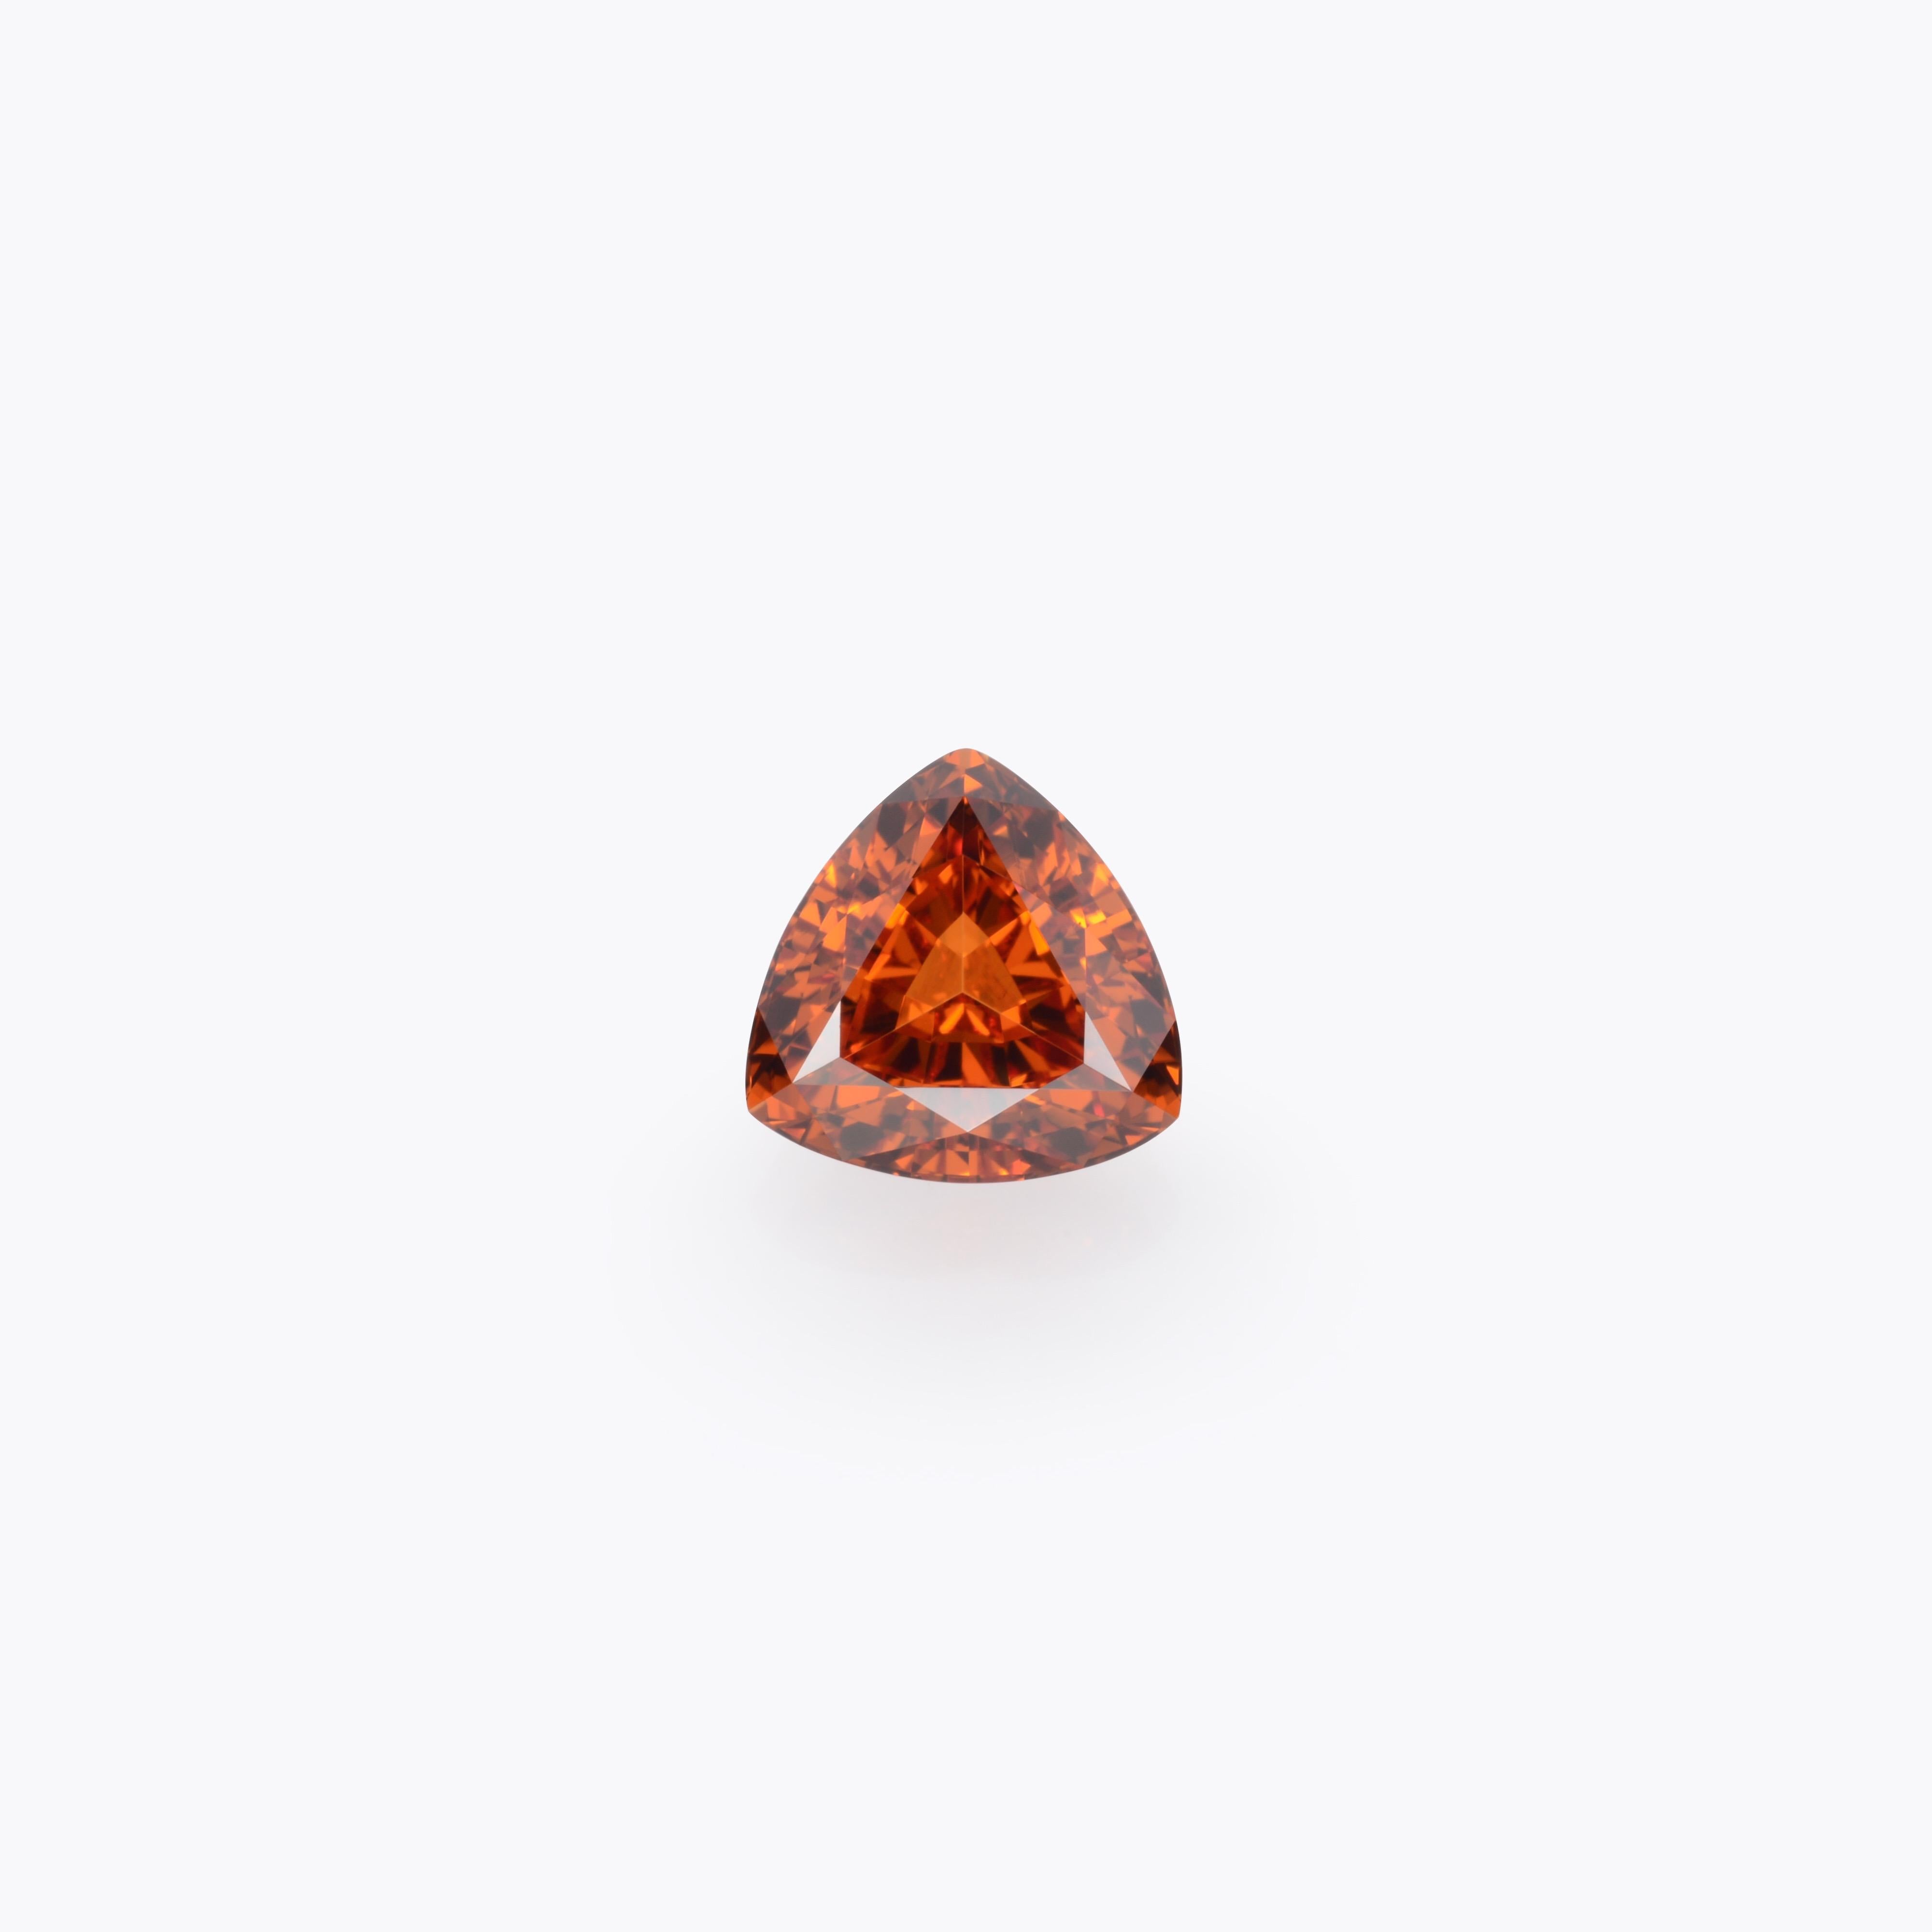 2.59 carat Mandarin Garnet Trillion gem, offered loose to a gem lover.
Mandarin Garnet dimensions: 8.00mm x 8.00mm x 5.00mm.
Returns are accepted and paid by us within 7 days of delivery.
We offer supreme custom jewelry work upon request. Please